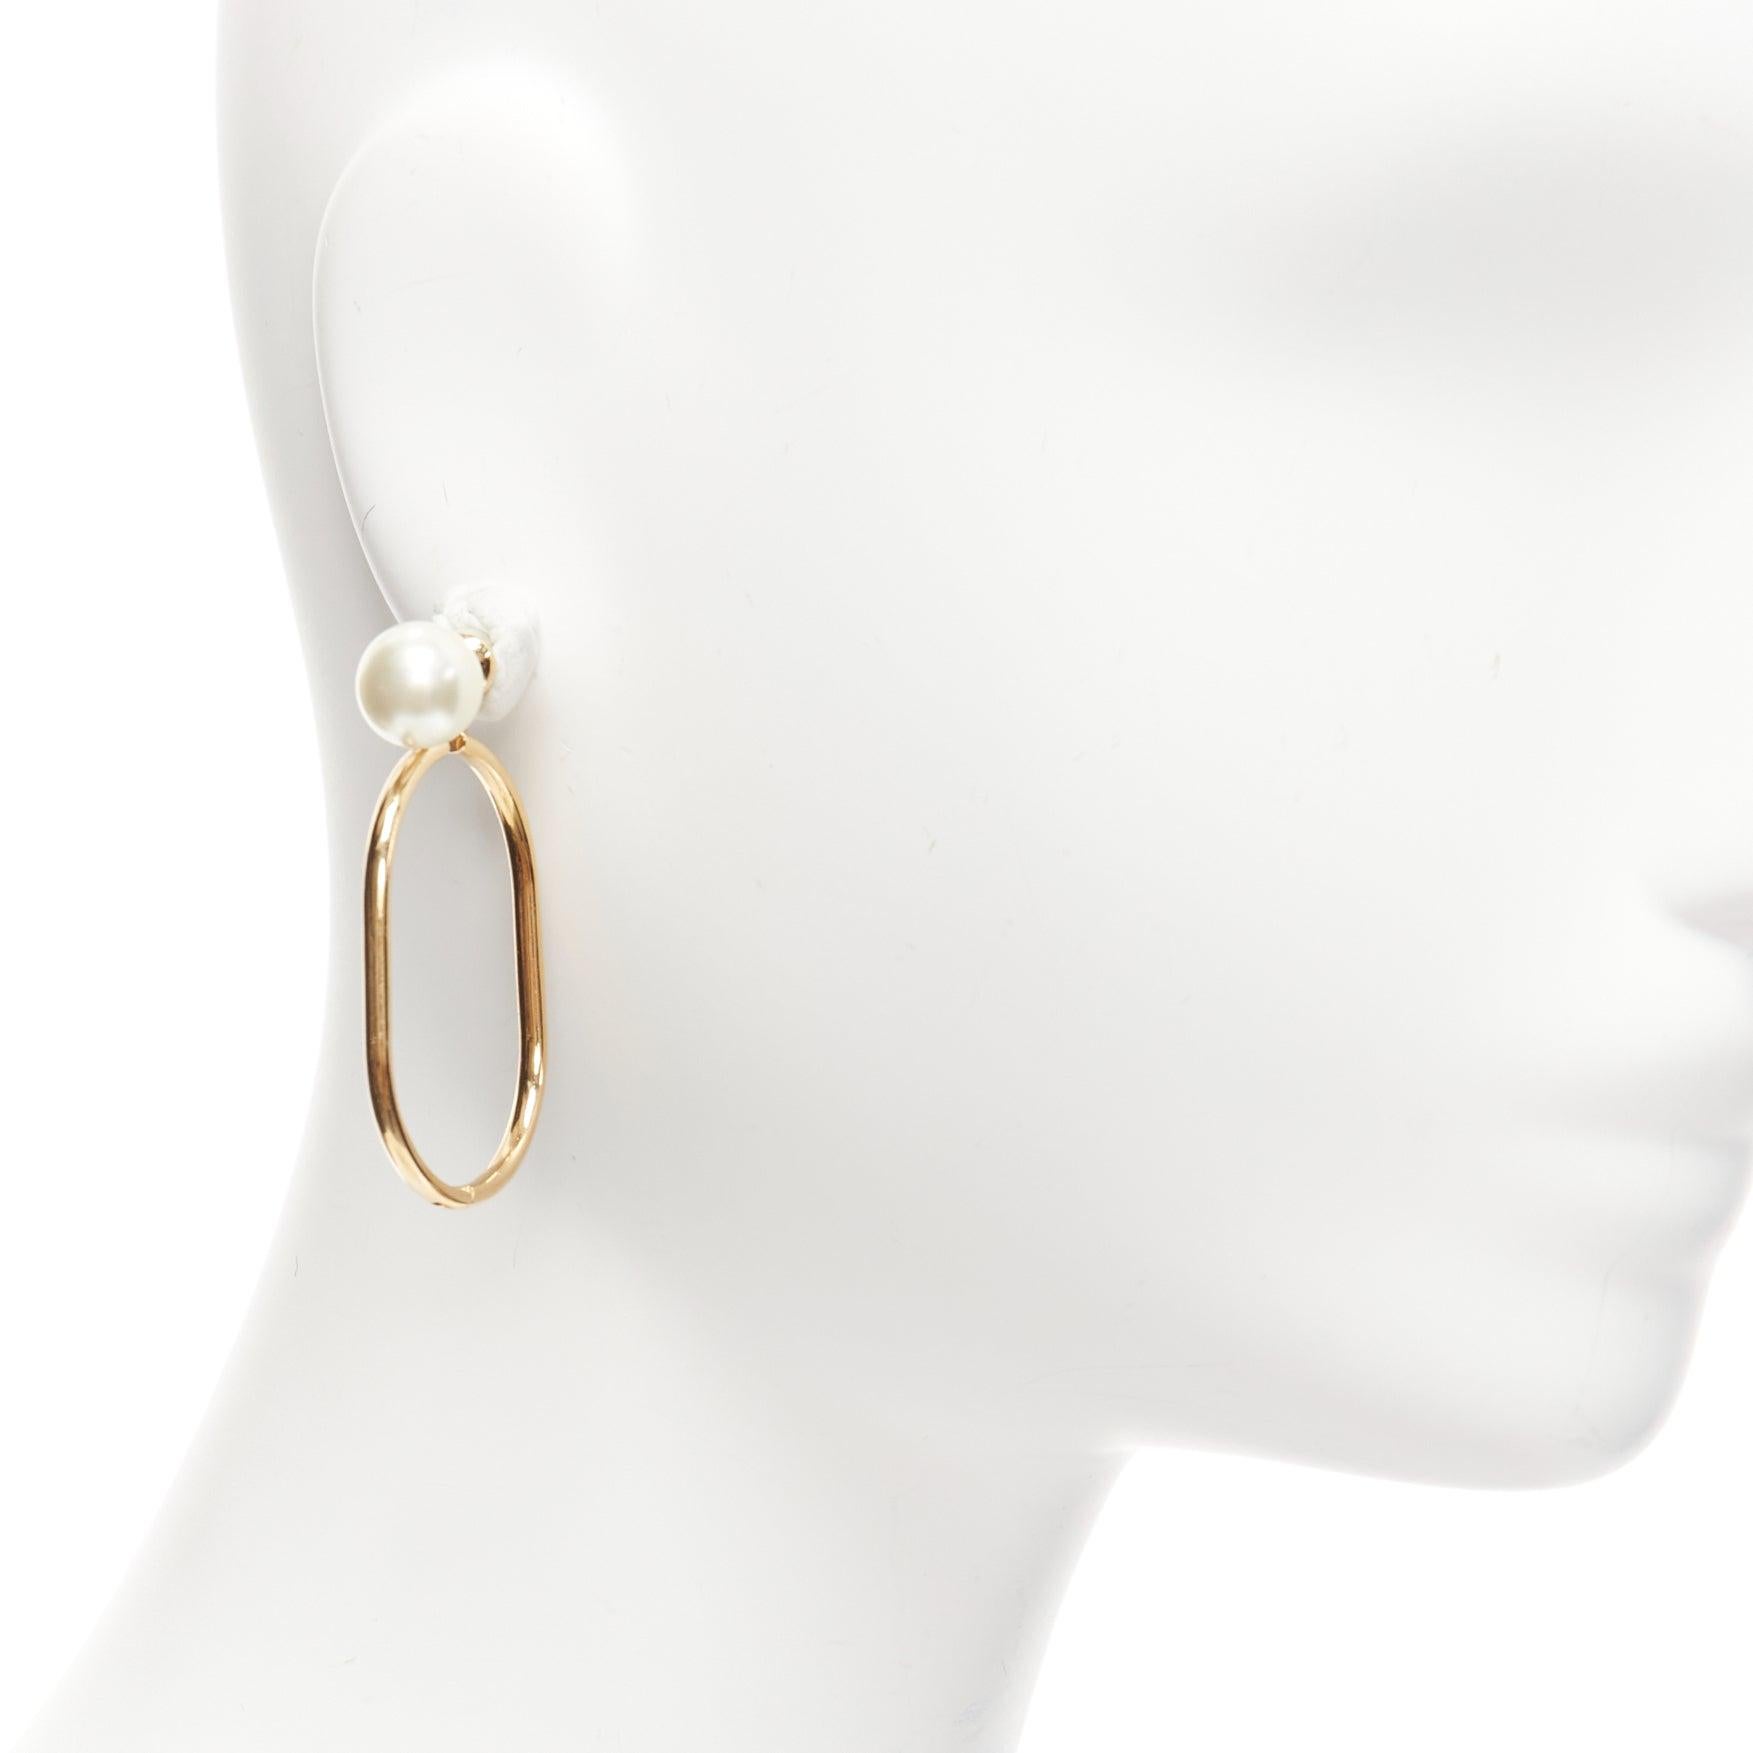 DIOR Tribale double pearl gold large oval hoop statement stud earrings pair
Reference: AAWC/A00906
Brand: Dior
Collection: Tribale
Material: Faux Pearl, Metal
Color: Gold, Pearl
Pattern: Solid
Closure: Pin
Lining: Gold Metal
Extra Details: Discreet